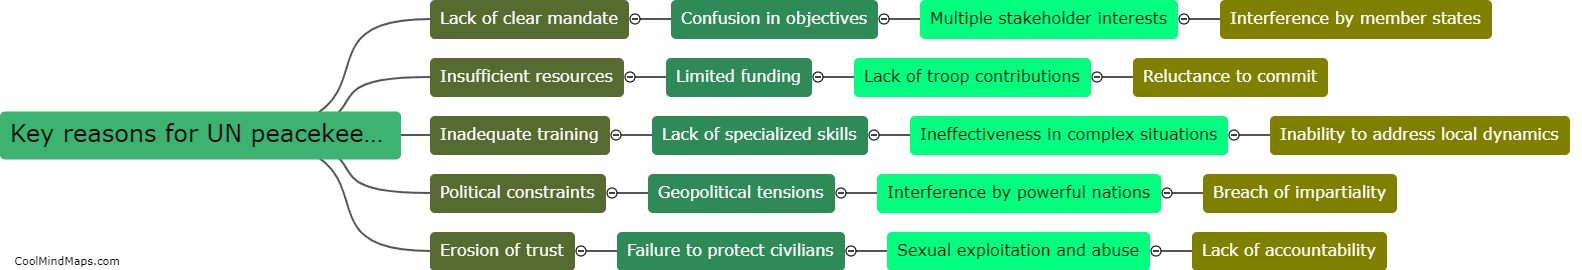 What are the key reasons for the failure of UN peacekeeping operations?